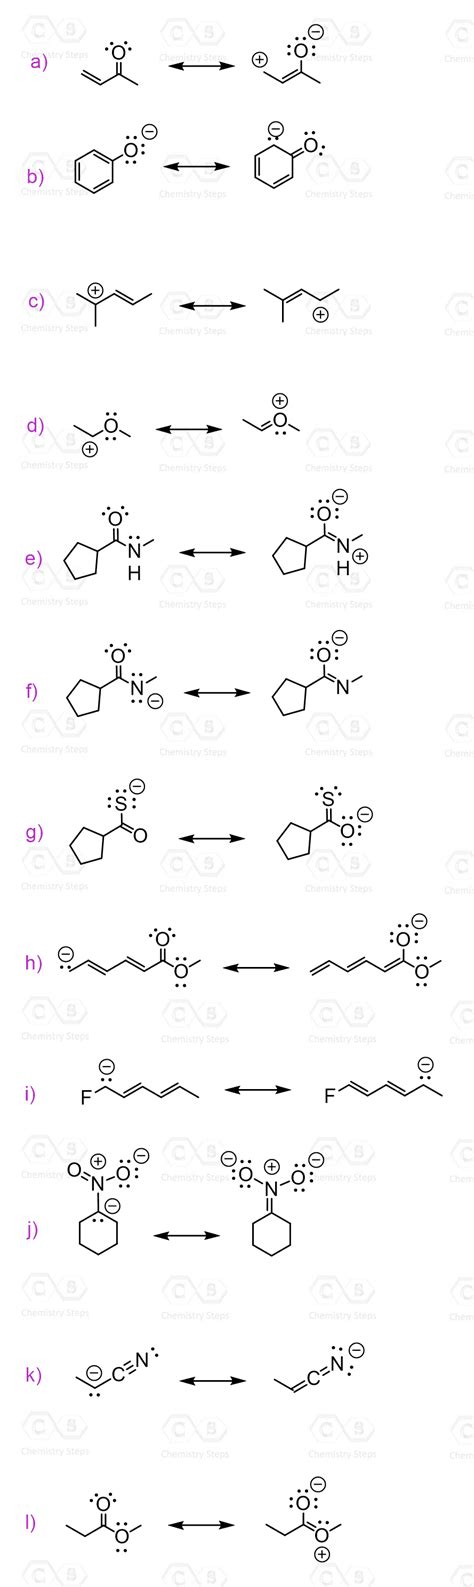 How To Choose The More Stable Resonance Structure Chemistry Steps